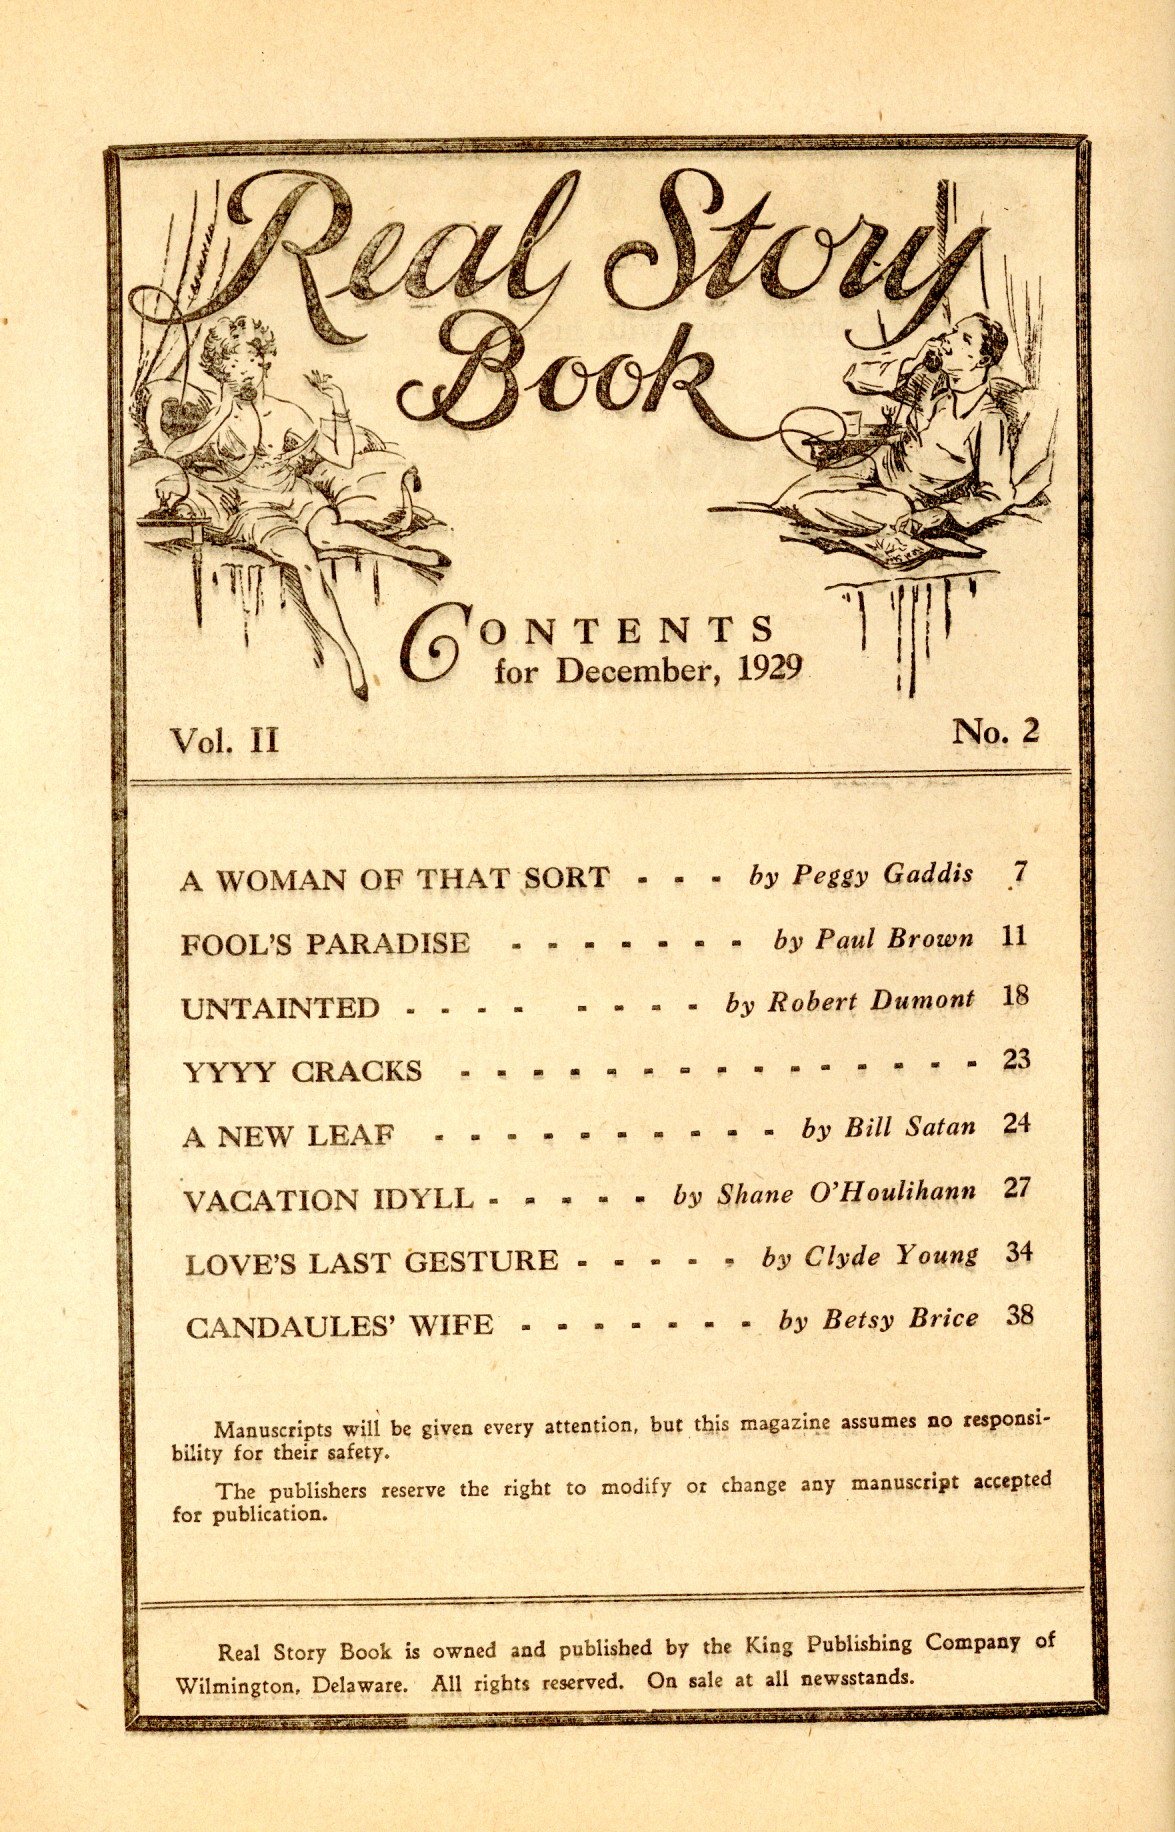 Real Story Book December 1929 contents